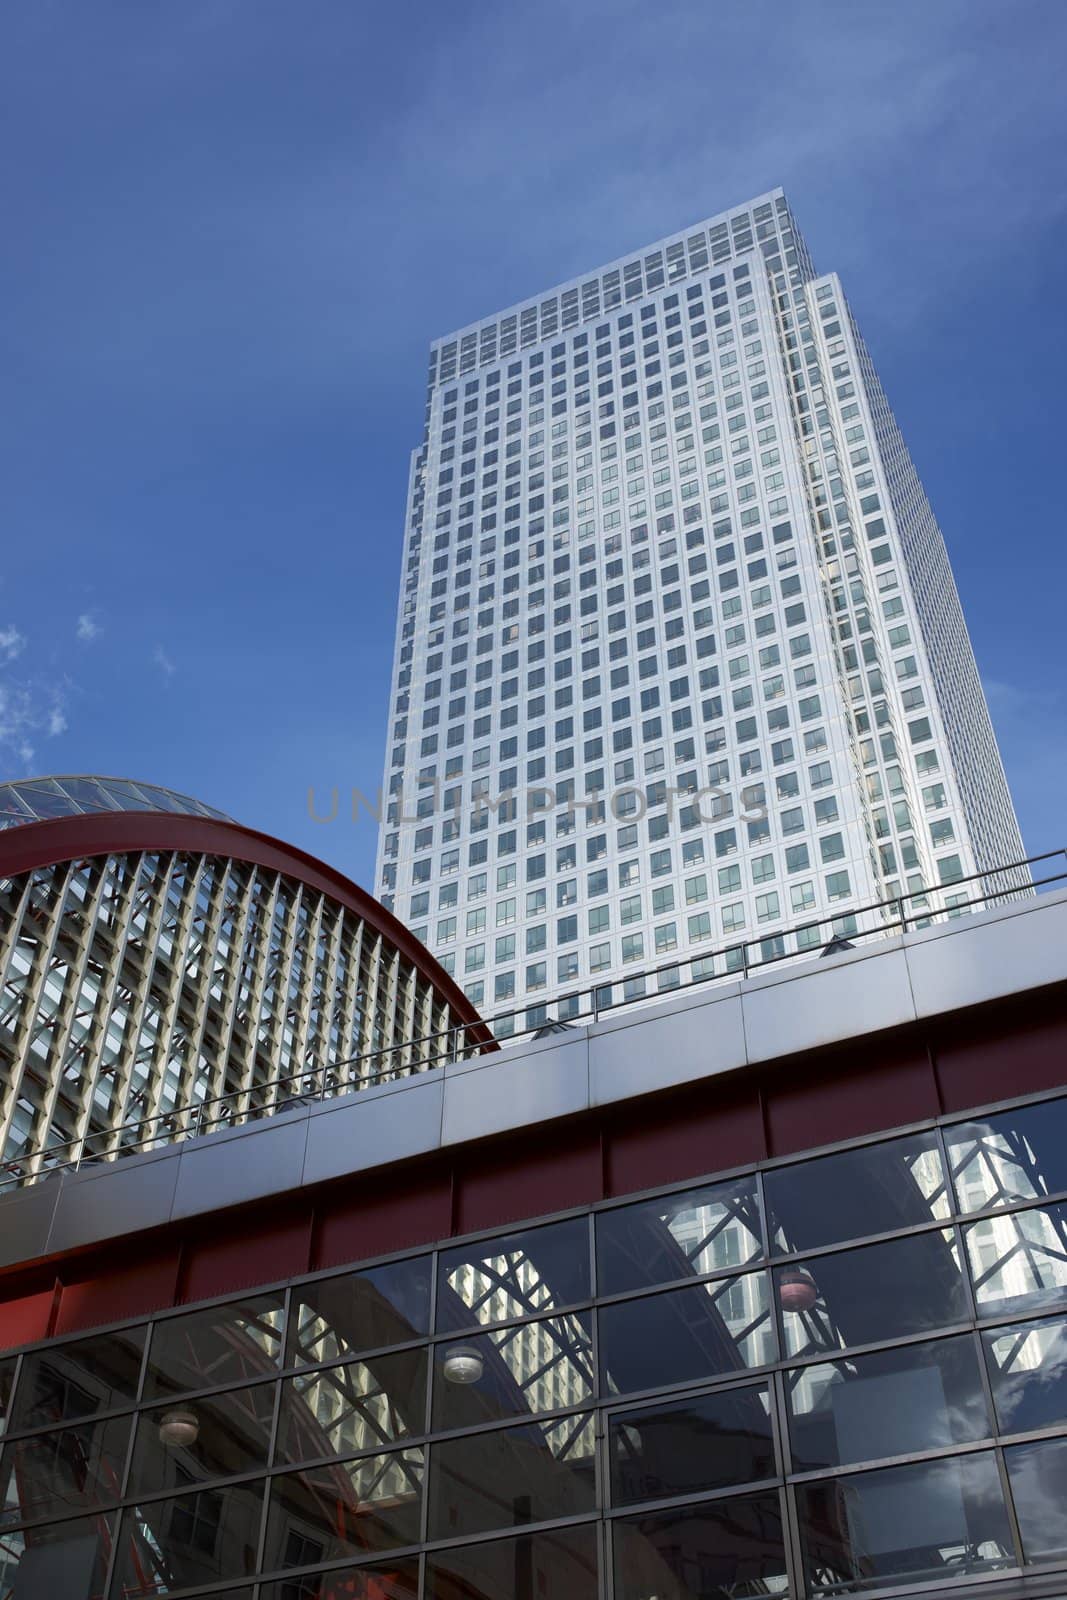 Modern office building towers above the Docklands Light Railway Station at Canary Wharf, London, England